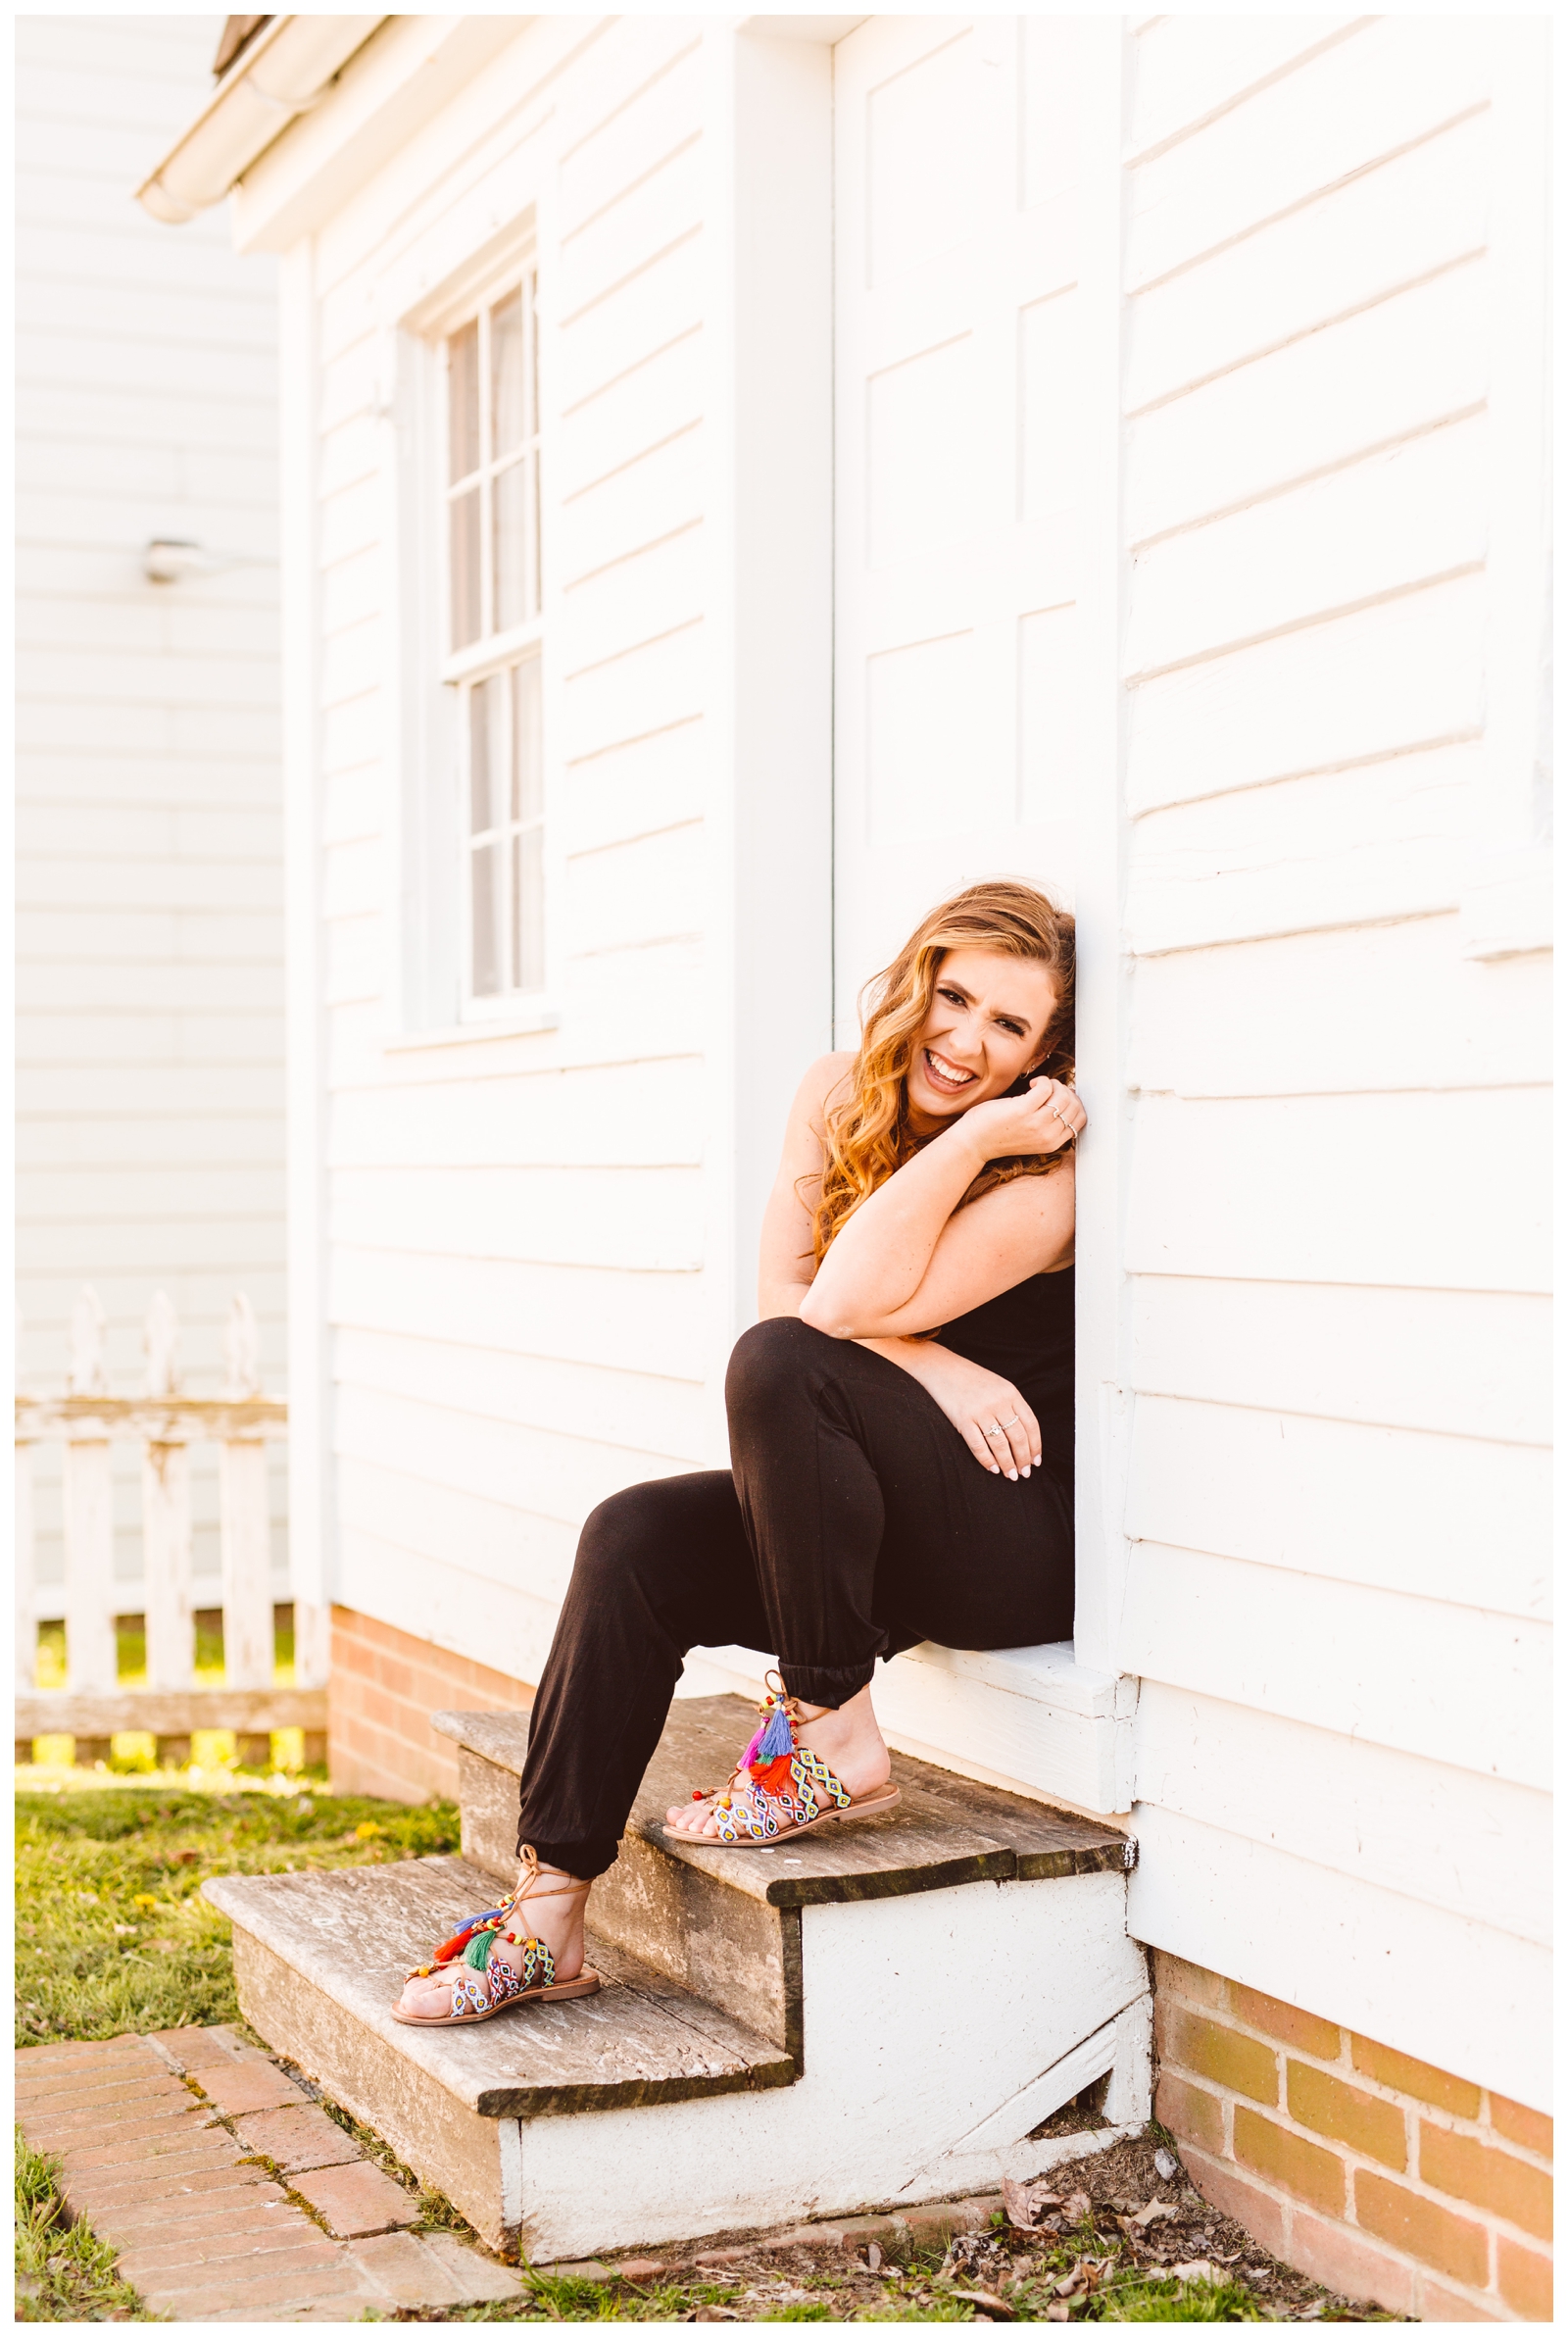 Bright, Bold and Colorful Senior Portrait Session Inspiration - Brooke Michelle Photography